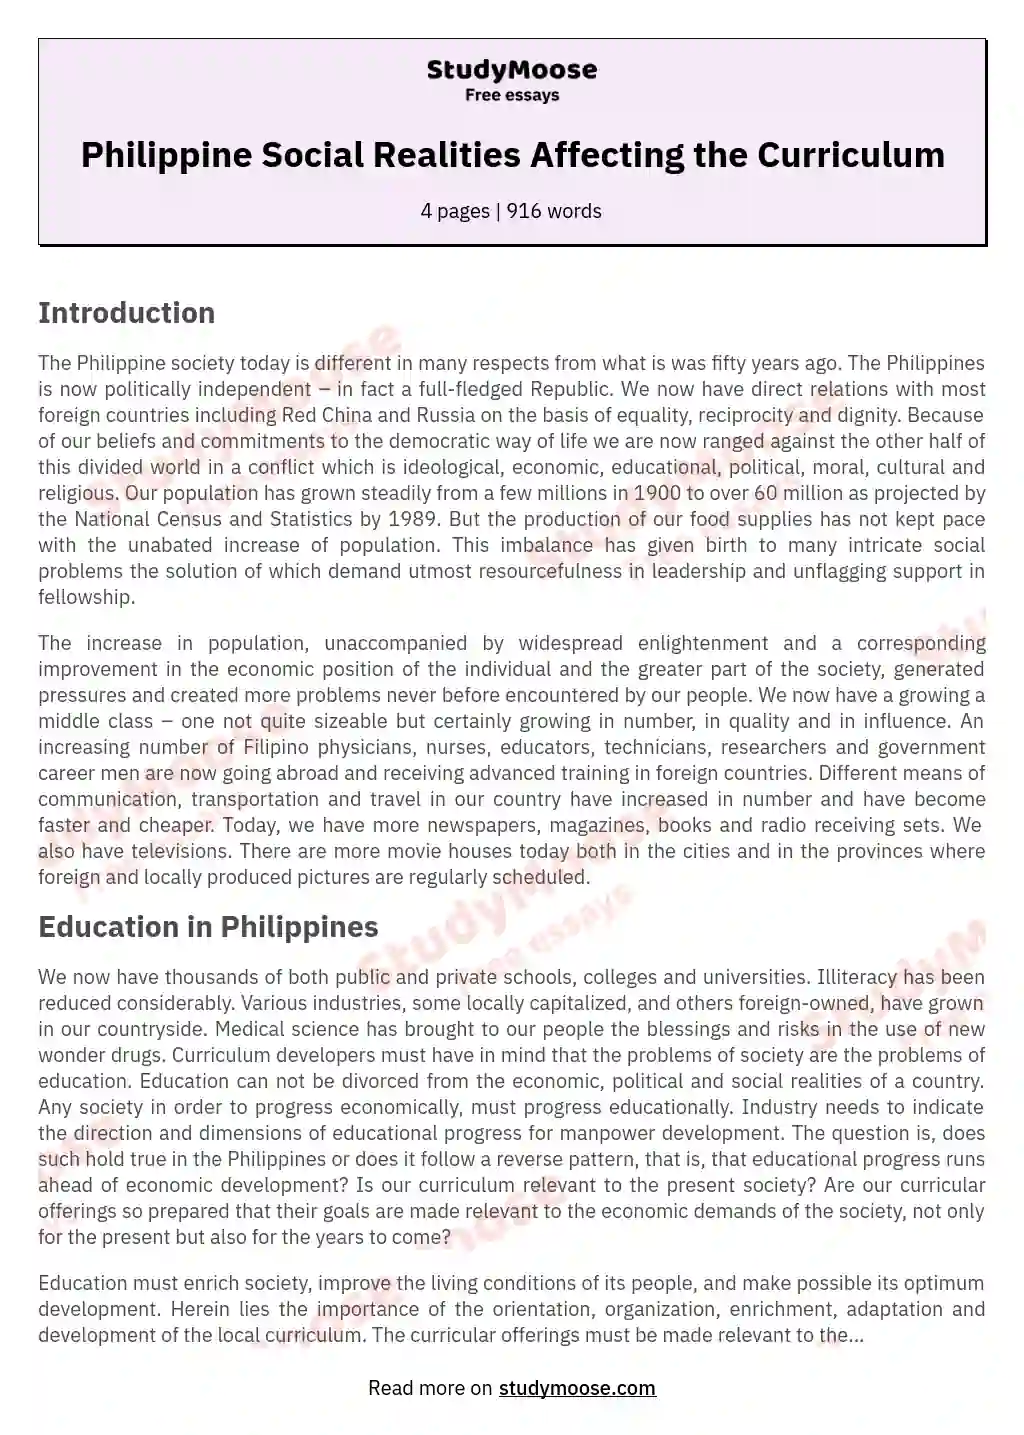 Philippine Social Realities Affecting the Curriculum essay